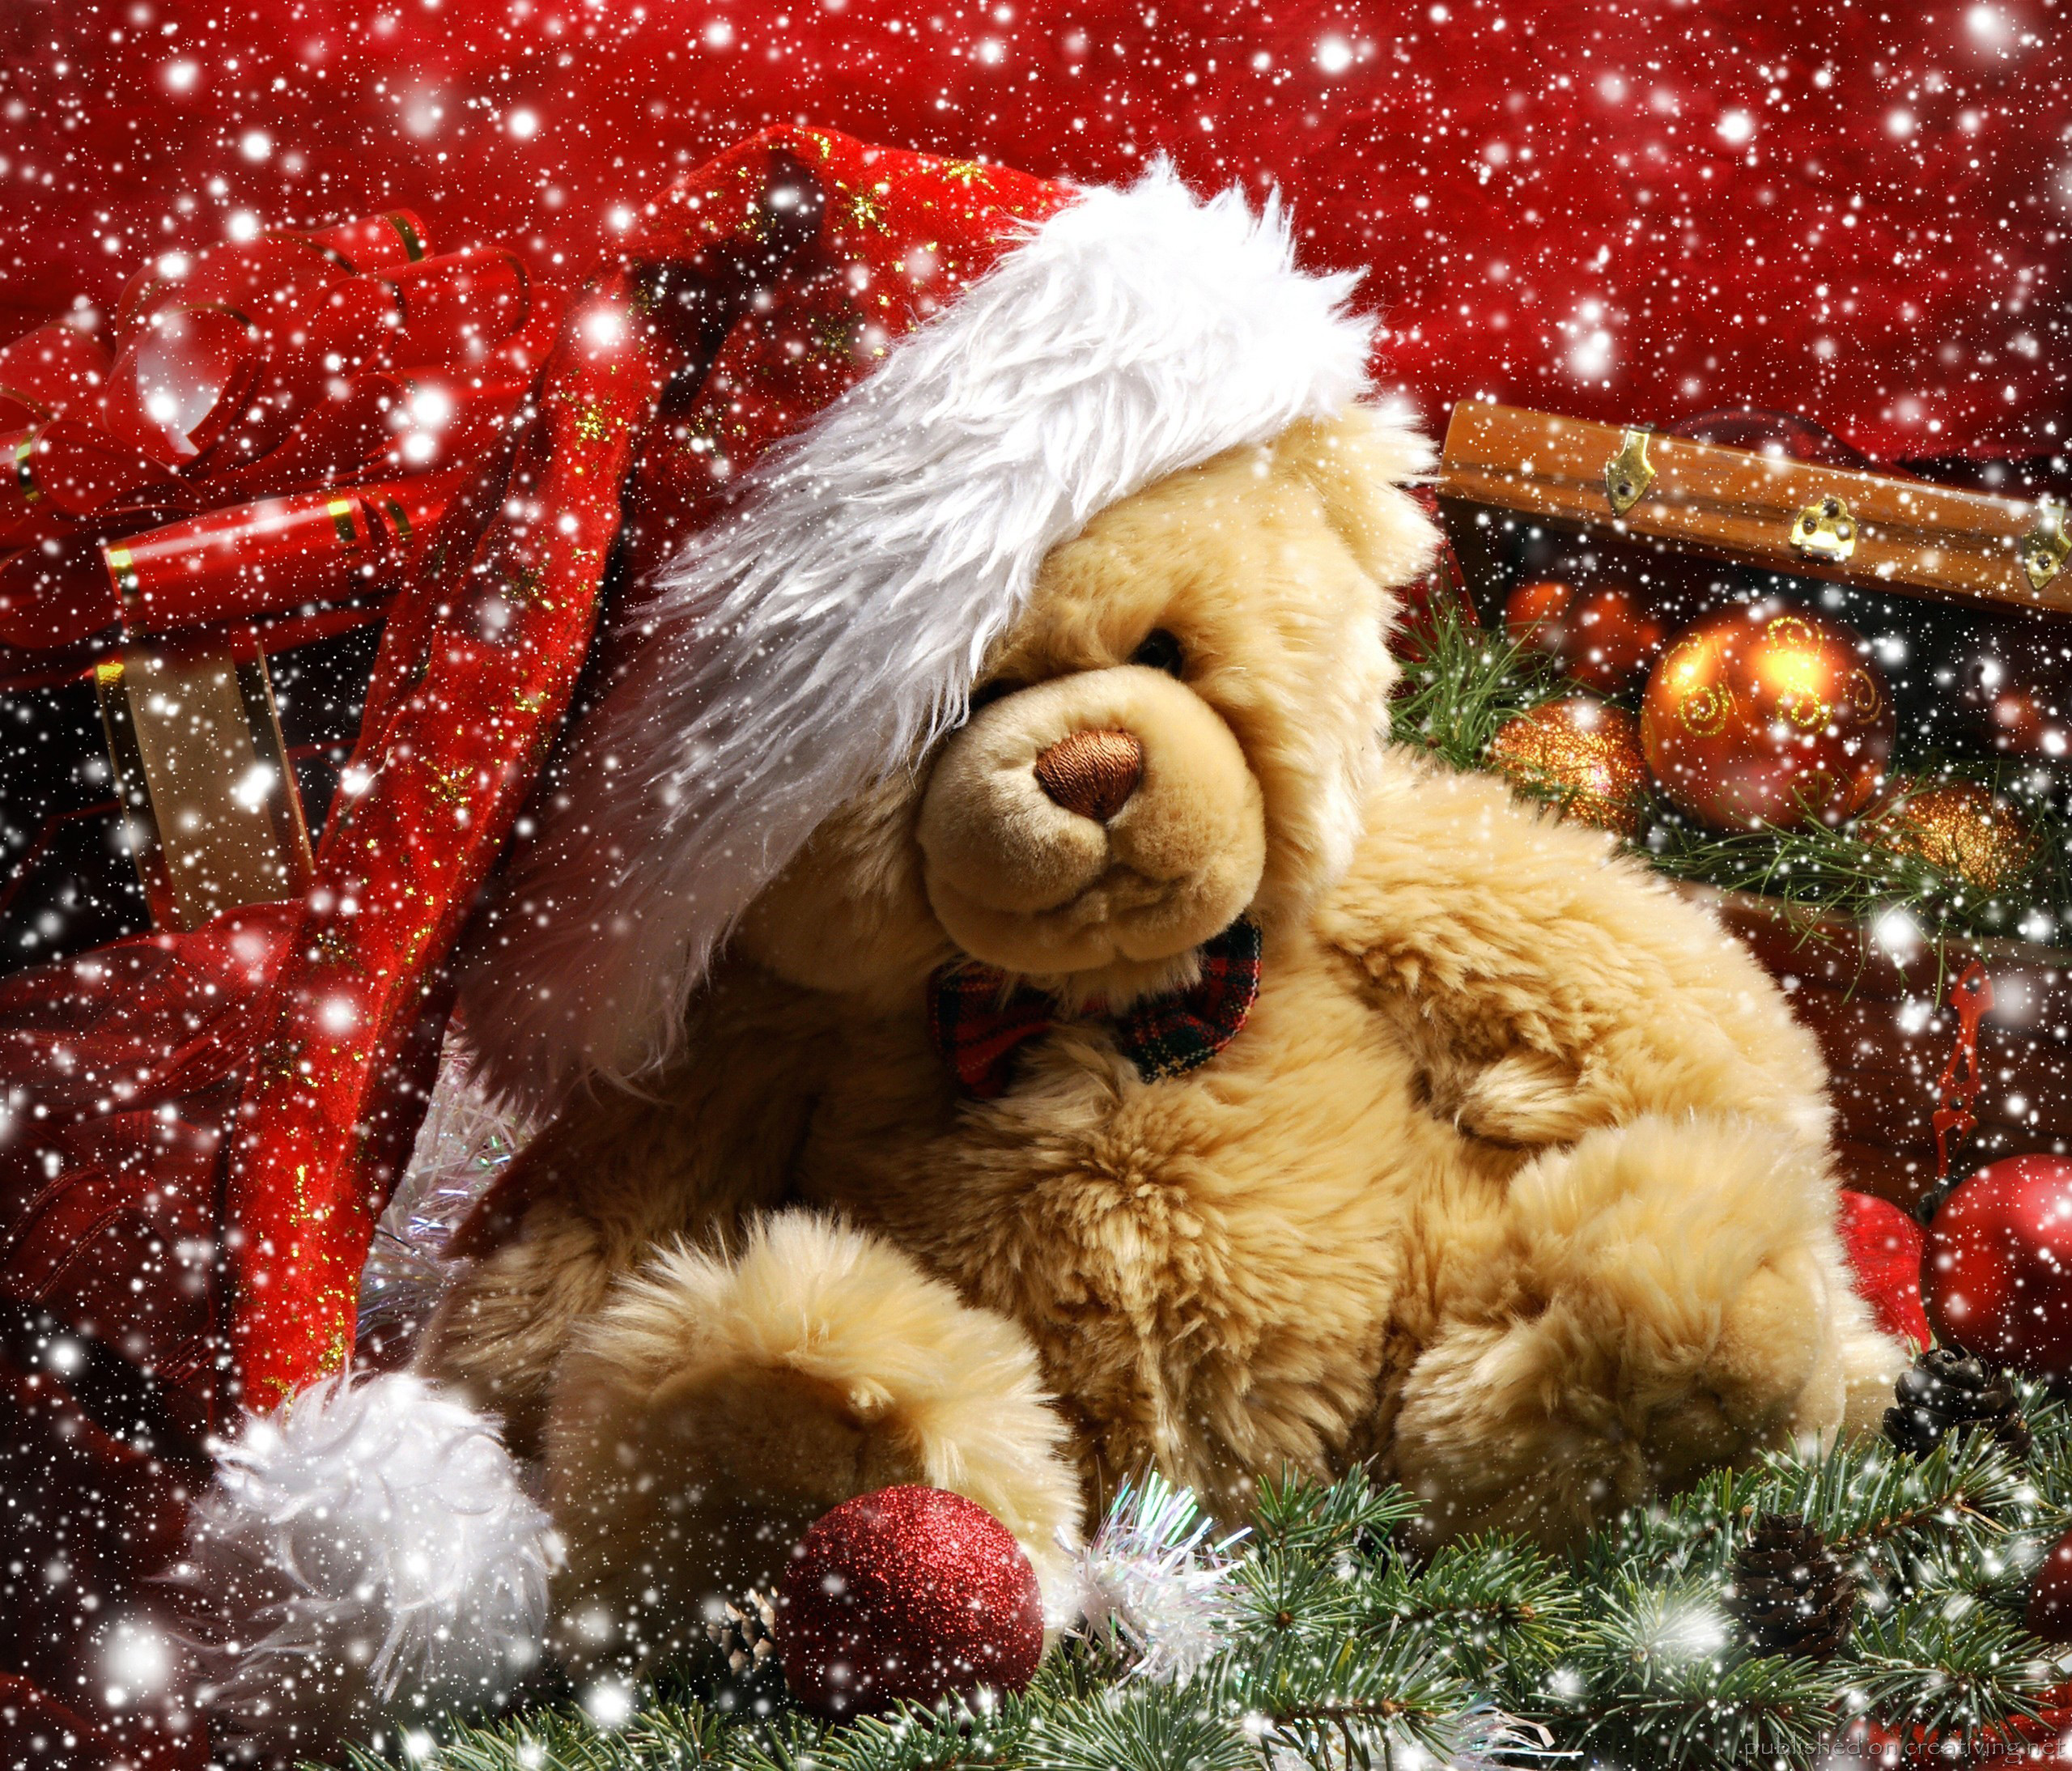 Christmas Background with Cute Teddy Bear | Gallery Yopriceville ...